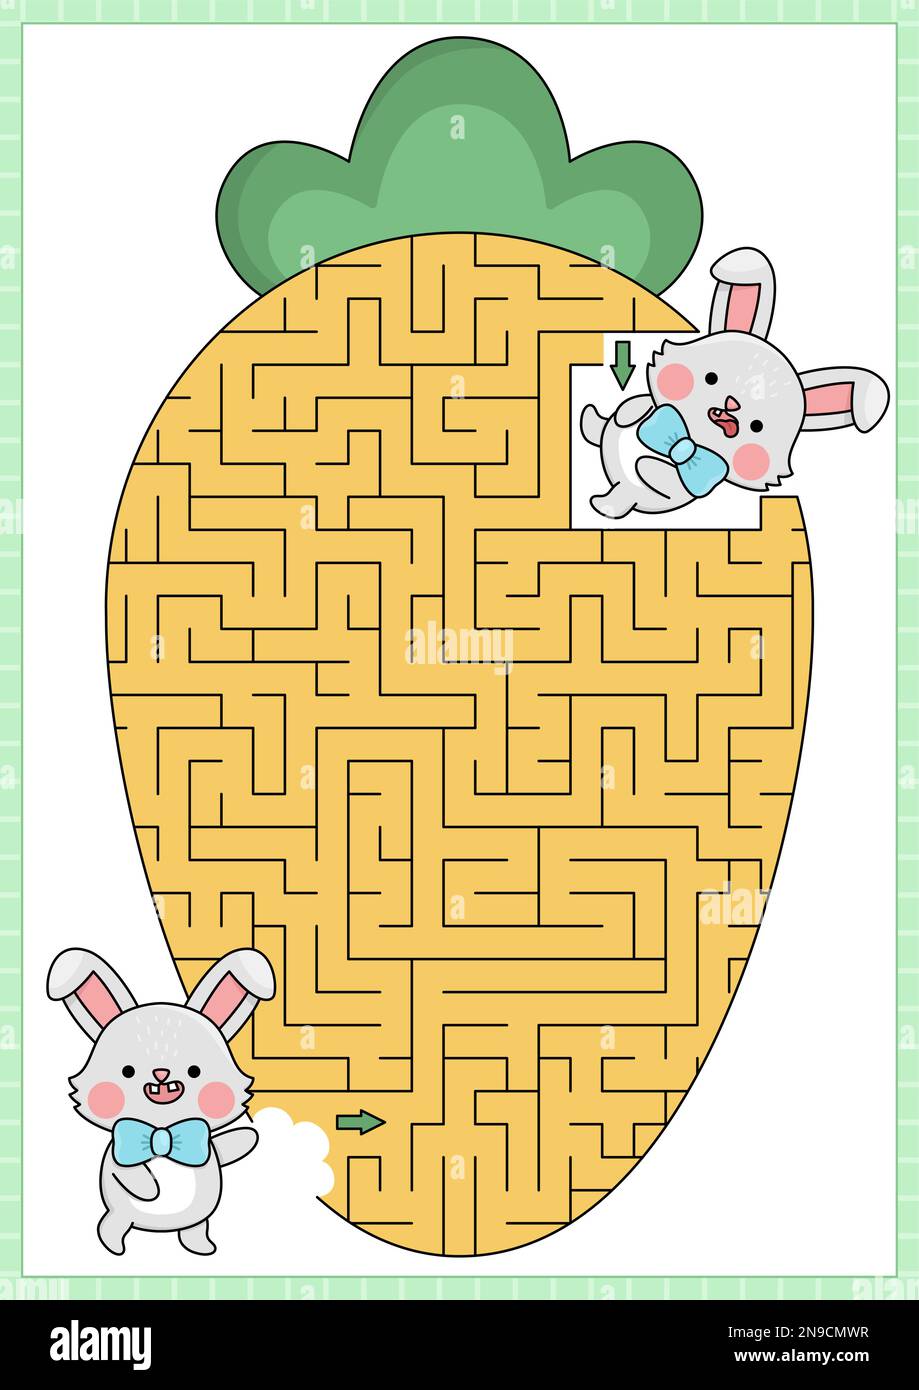 Easter maze for kids. Spring holiday preschool printable activity with kawaii bunny eating big carrot. Geometrical labyrinth game or puzzle with cute Stock Vector